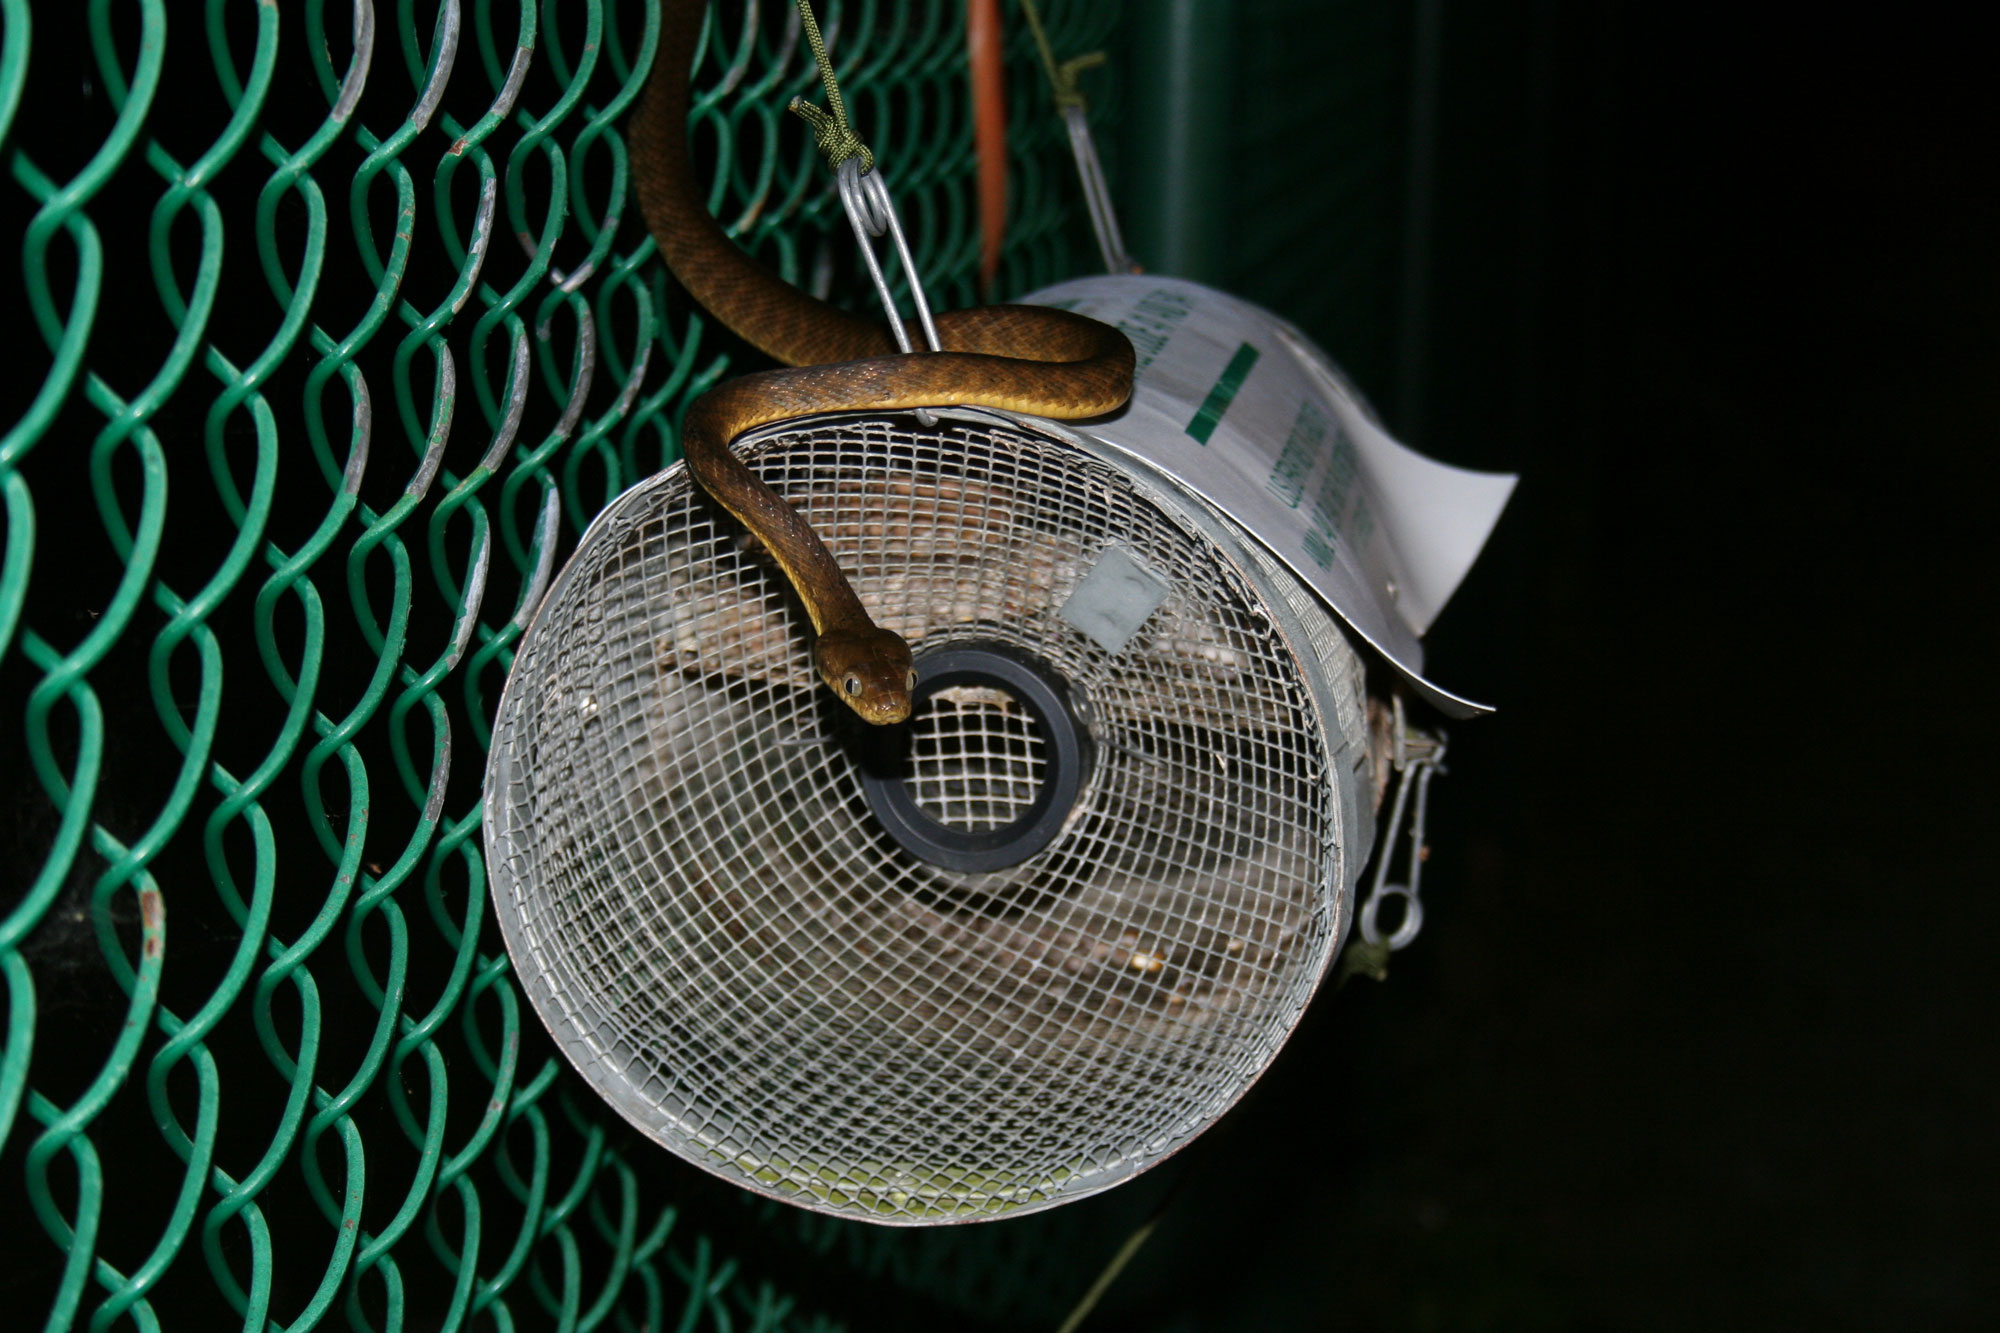 A brown tree snake perched on a trap attached to a chainlike fence. The trap is a cylindrical container made of metal mesh with a small open hole at one end.